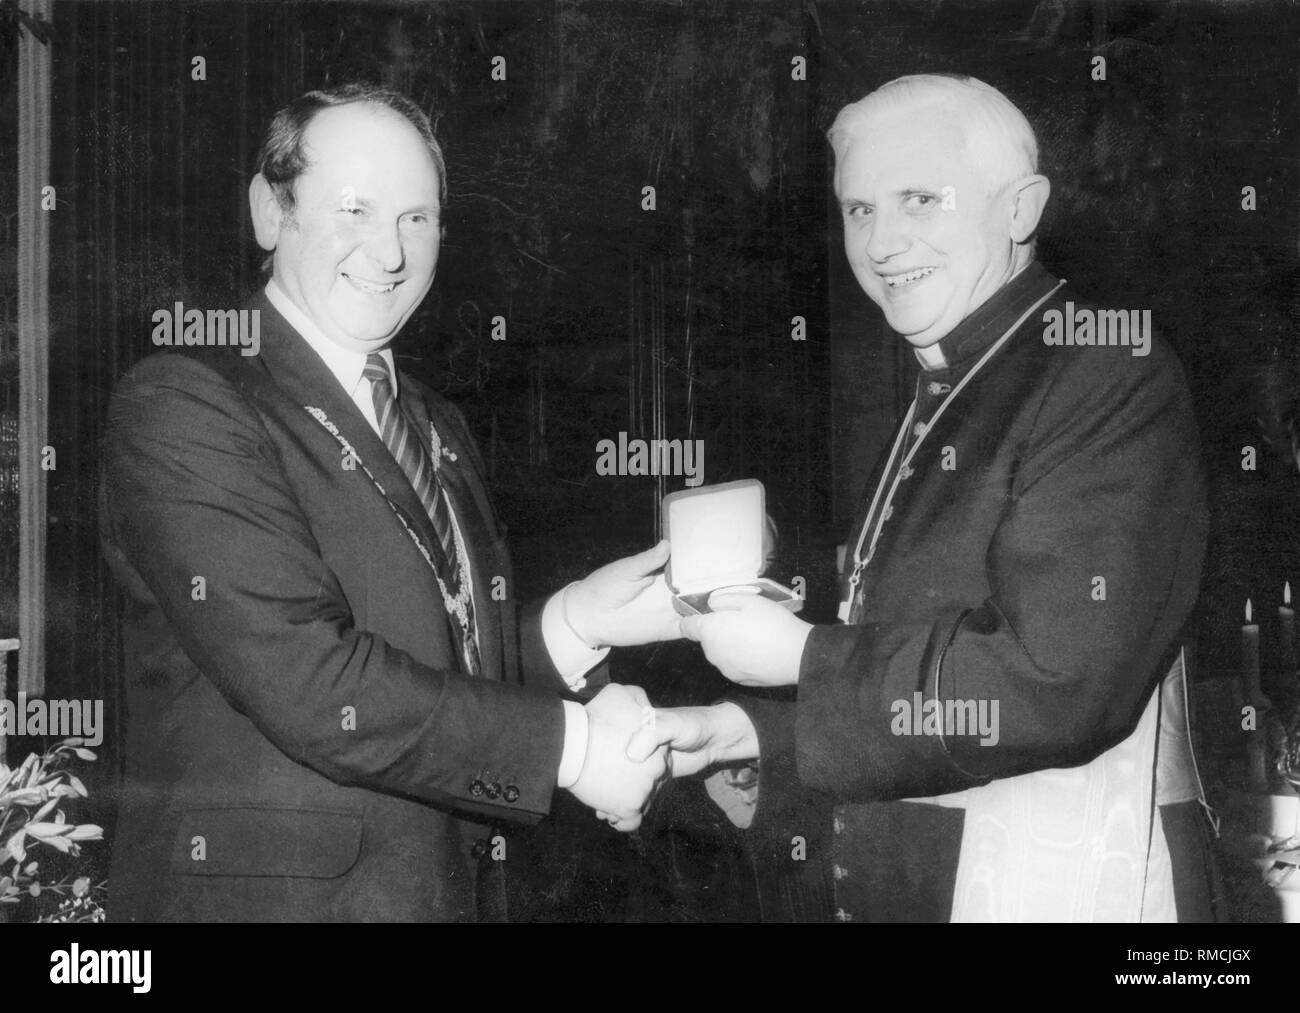 Lord Mayor Erich Kiesl presents the medal 'Muenchen leuchtet' ('Munich Shines') in gold to the outgoing Archbishop of Munich and Freising, Joseph Cardinal Ratzinger. Cardinal Ratzinger was appointed Prefect of the Roman Congregation of the Faith in Rome. Photo undated. Stock Photo